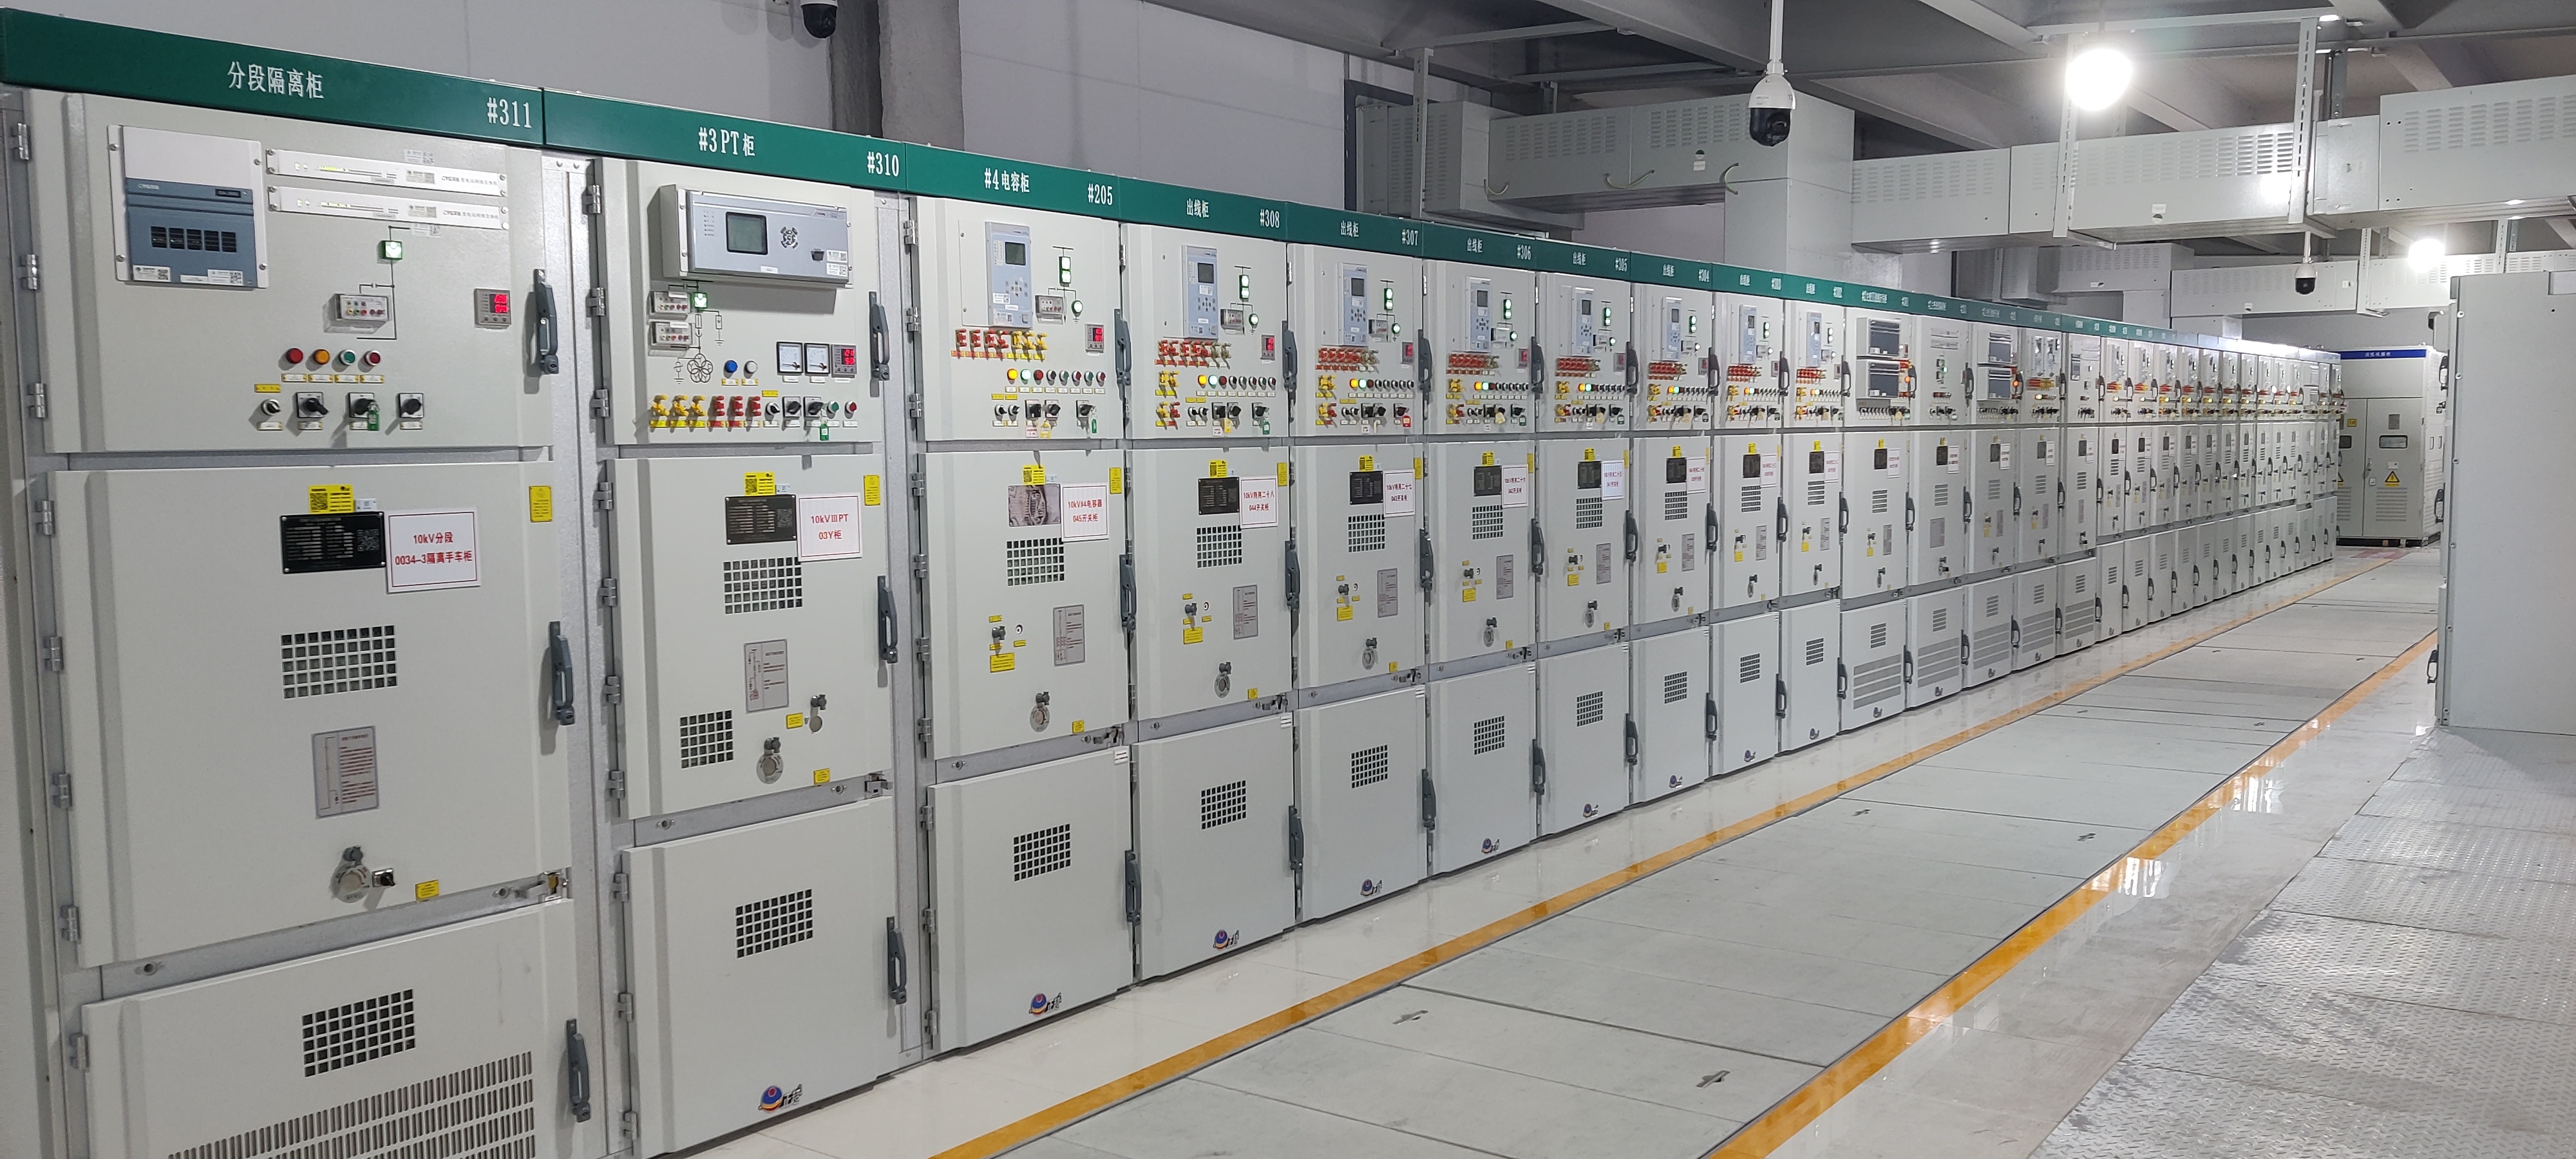 State Grid Gaomi Substation in Shandong Province